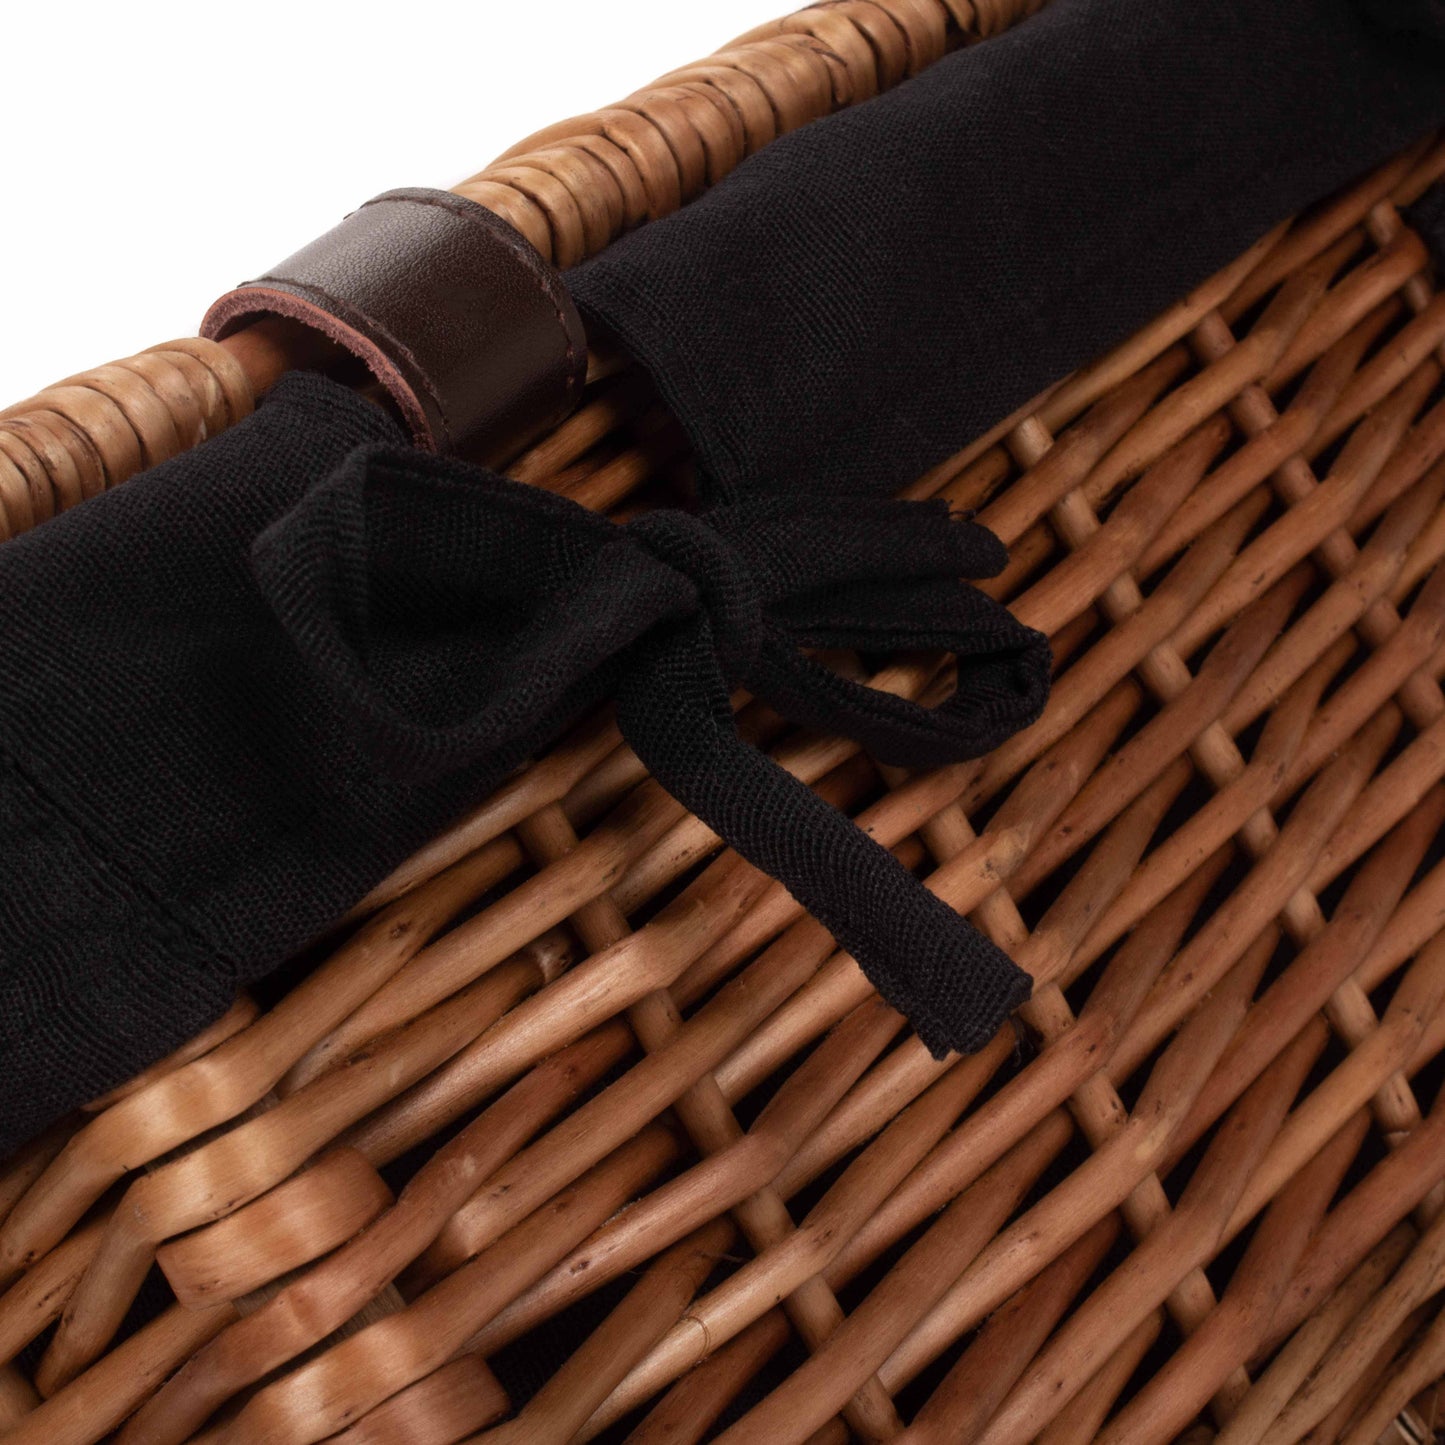 16 Inch Double Steamed Hamper With Black Lining